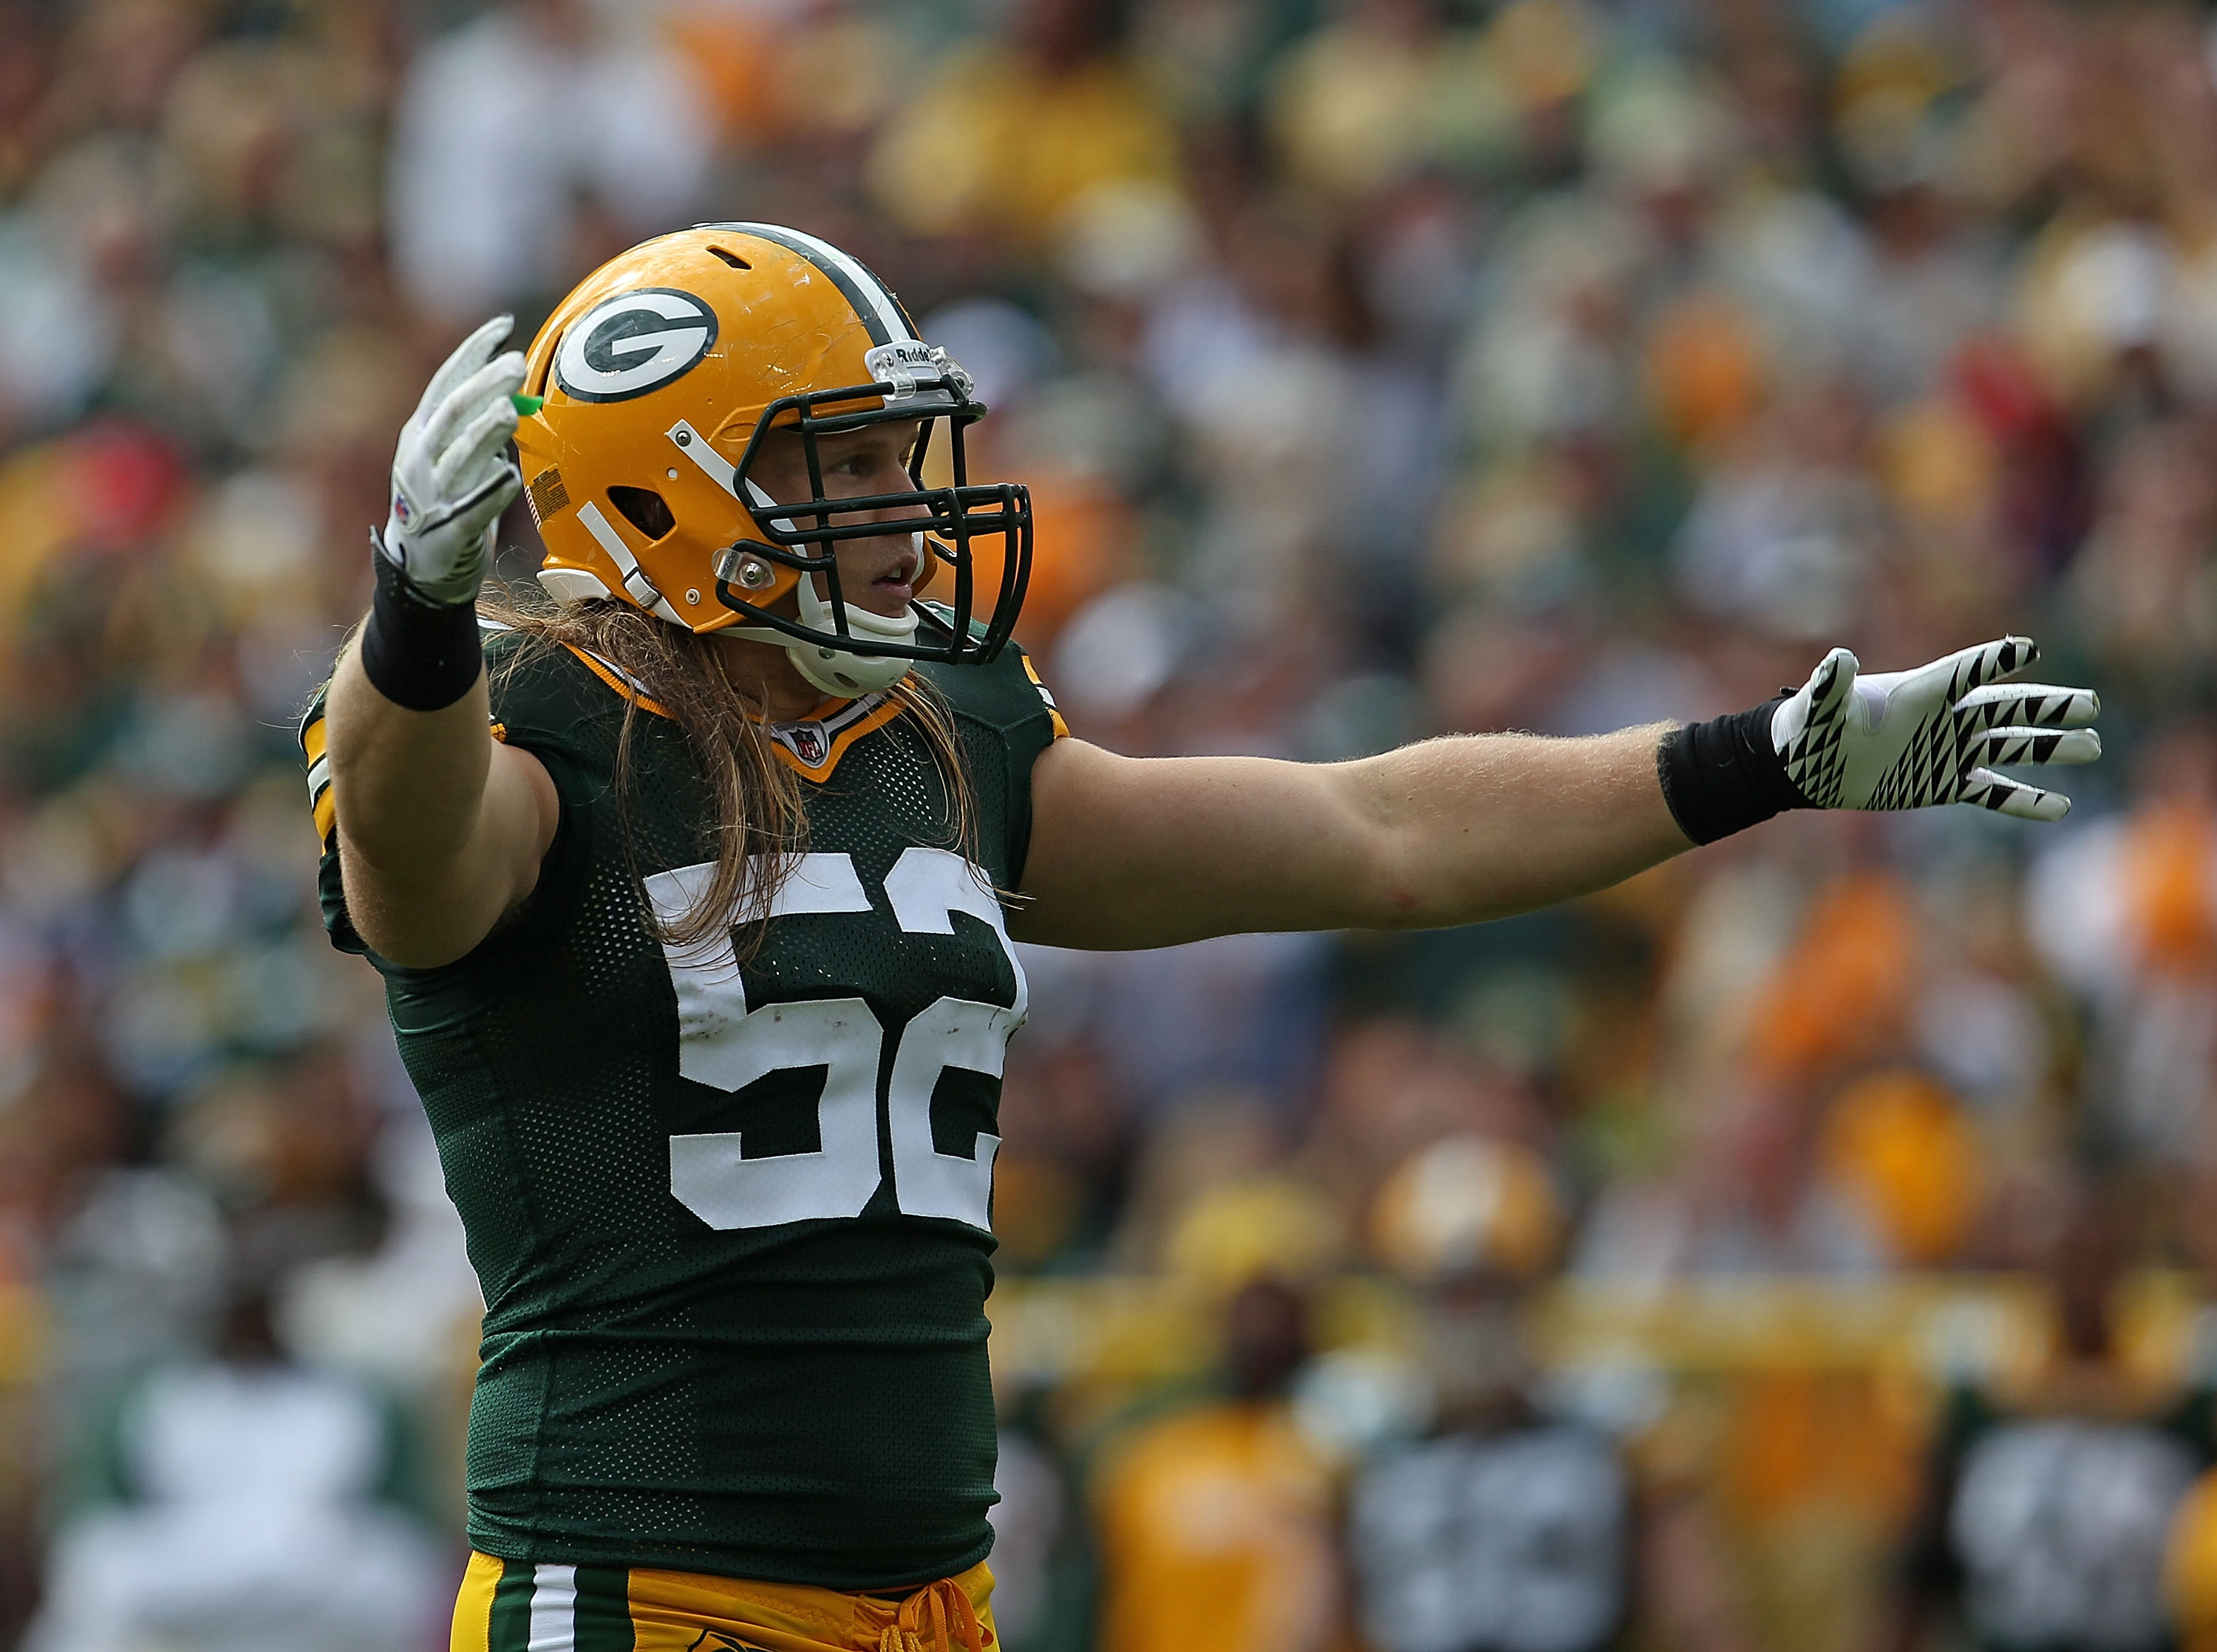 GREEN BAY, WI - SEPTEMBER 19: Clay Matthews #52 of the Green Bay Packers encourages the crowd during a game against the Buffalo Bills at Lambeau Field on September 19, 2010 in Green Bay, Wisconsin. The Packers defeated the Bills 34-7.  (Photo by Jonathan